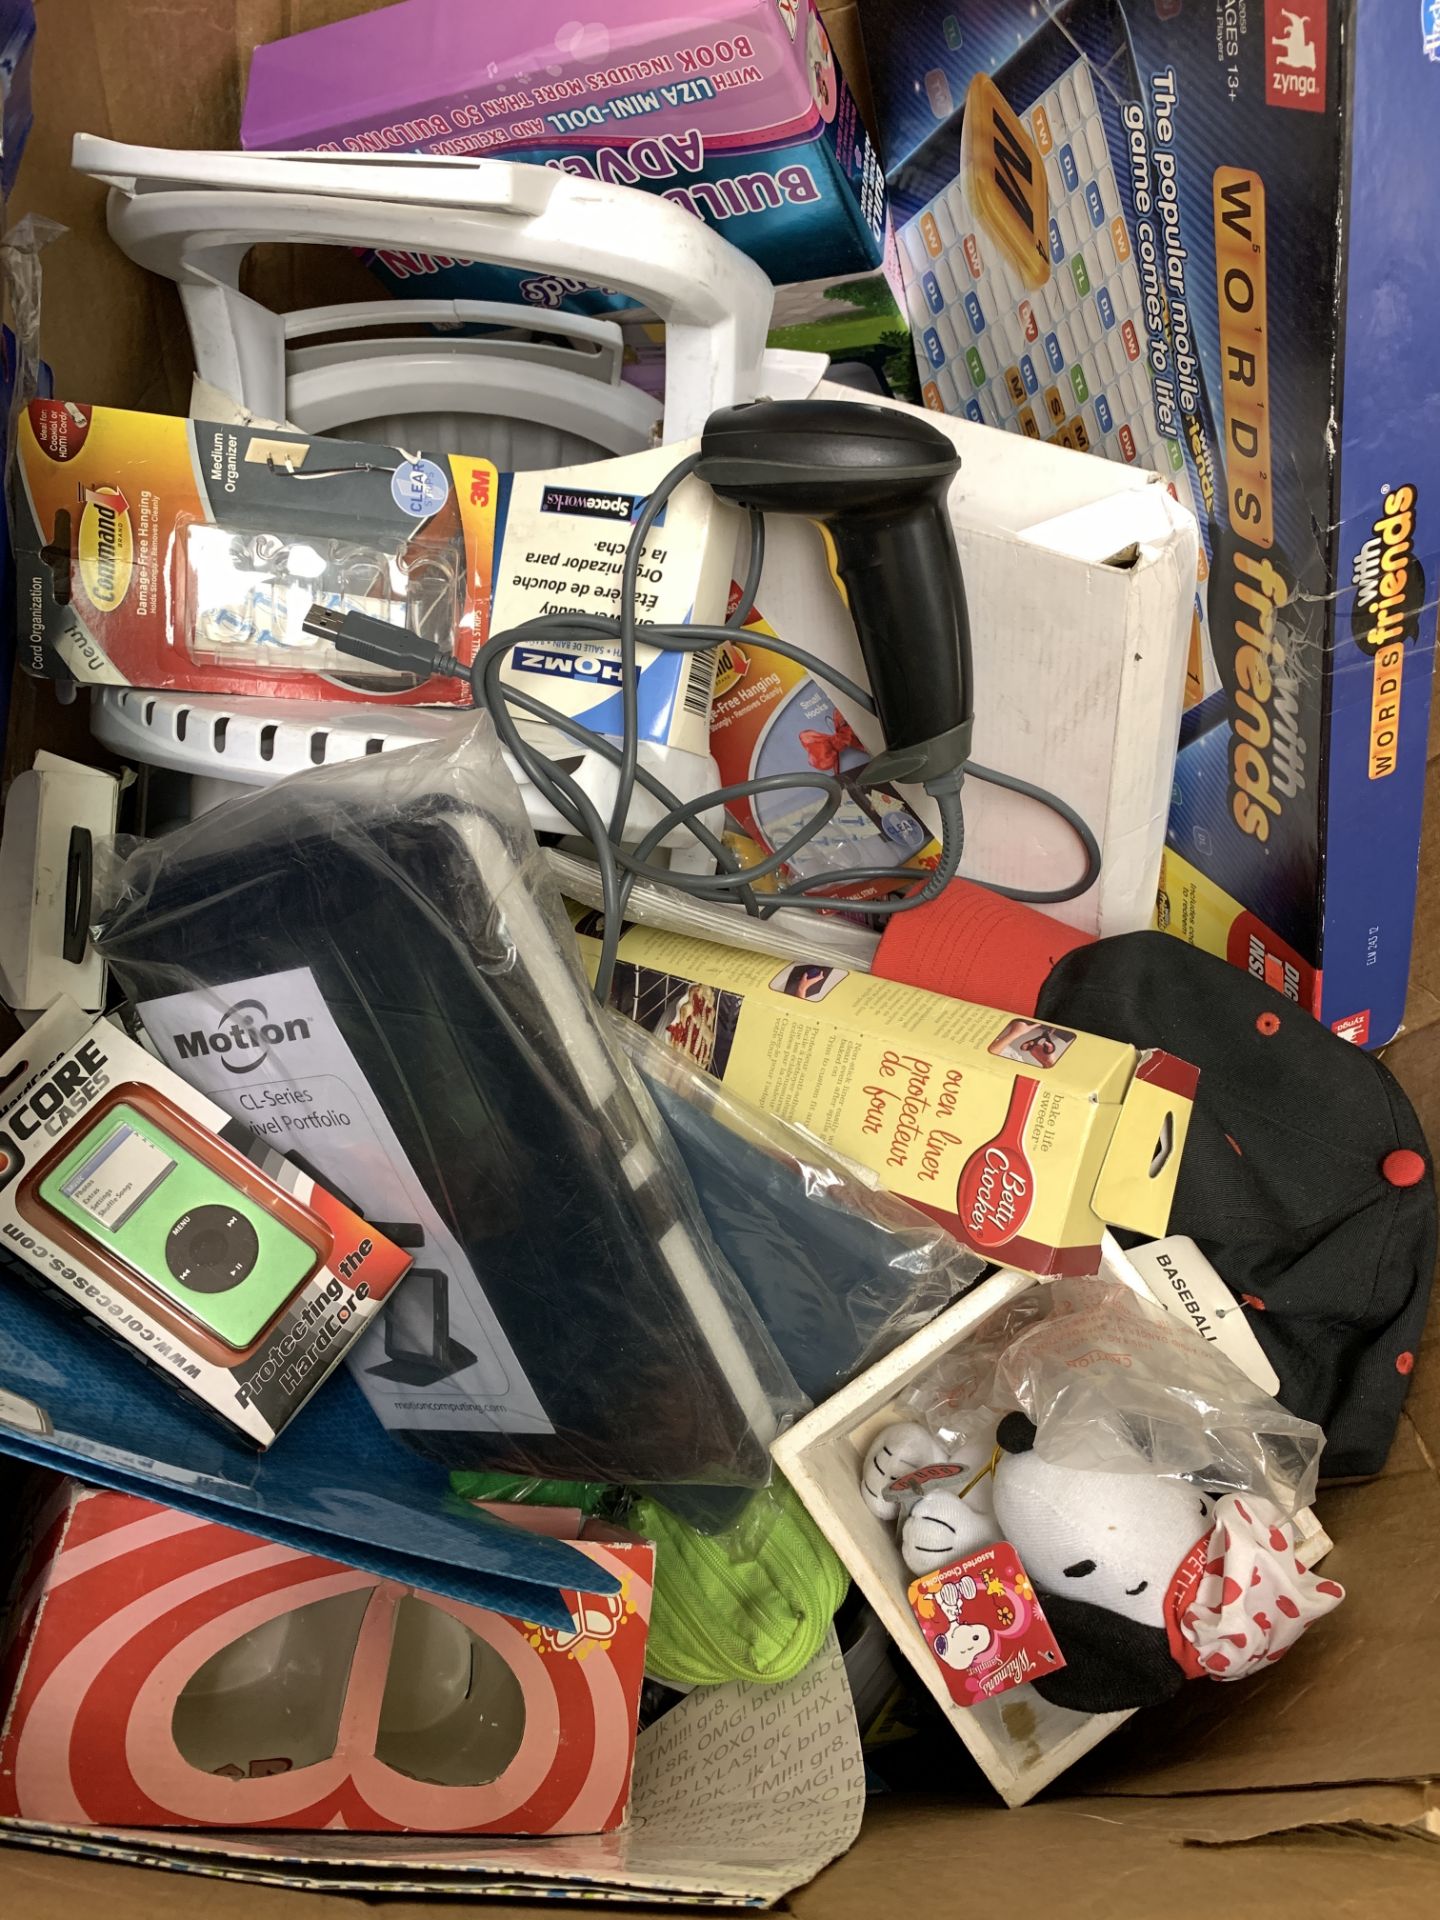 UNSORTED MIXED BOX OF MISC HOUSEHOLD GOODS, TOYS AND ACCESSORIES.  ABOUT 1-2 FEET DEEP OF PRODUCT